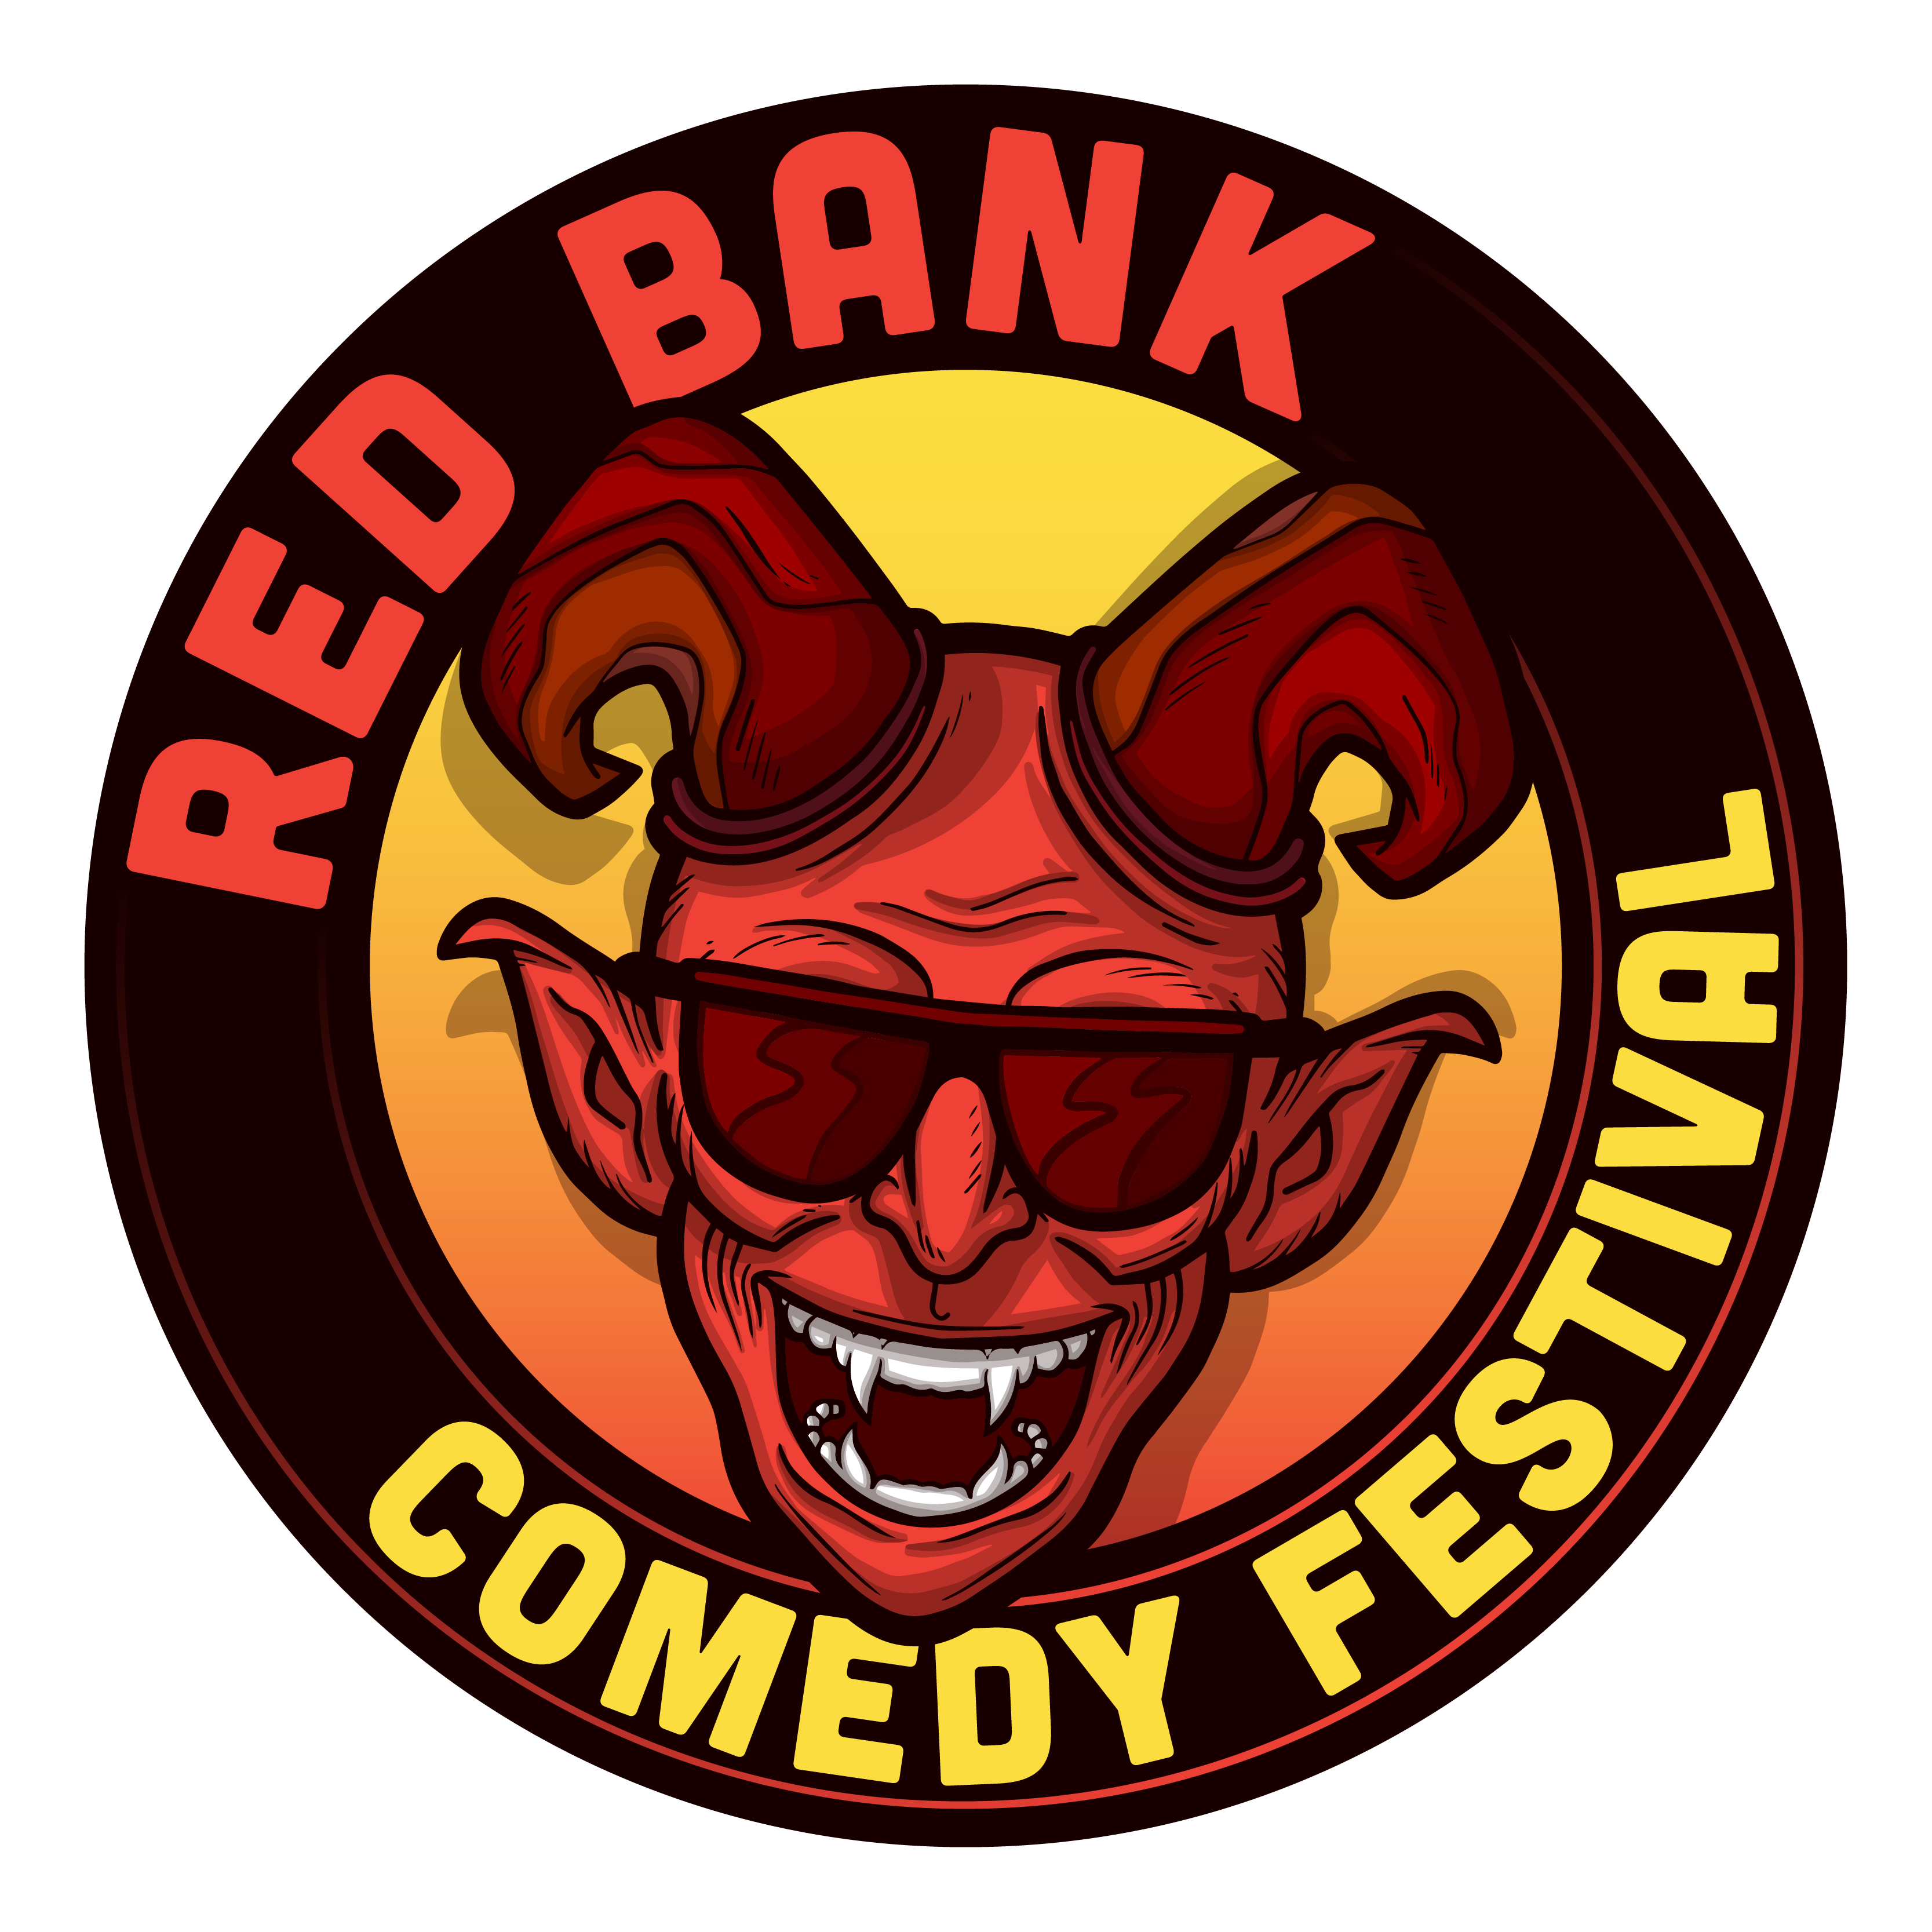 Red Bank Comedy  Festival